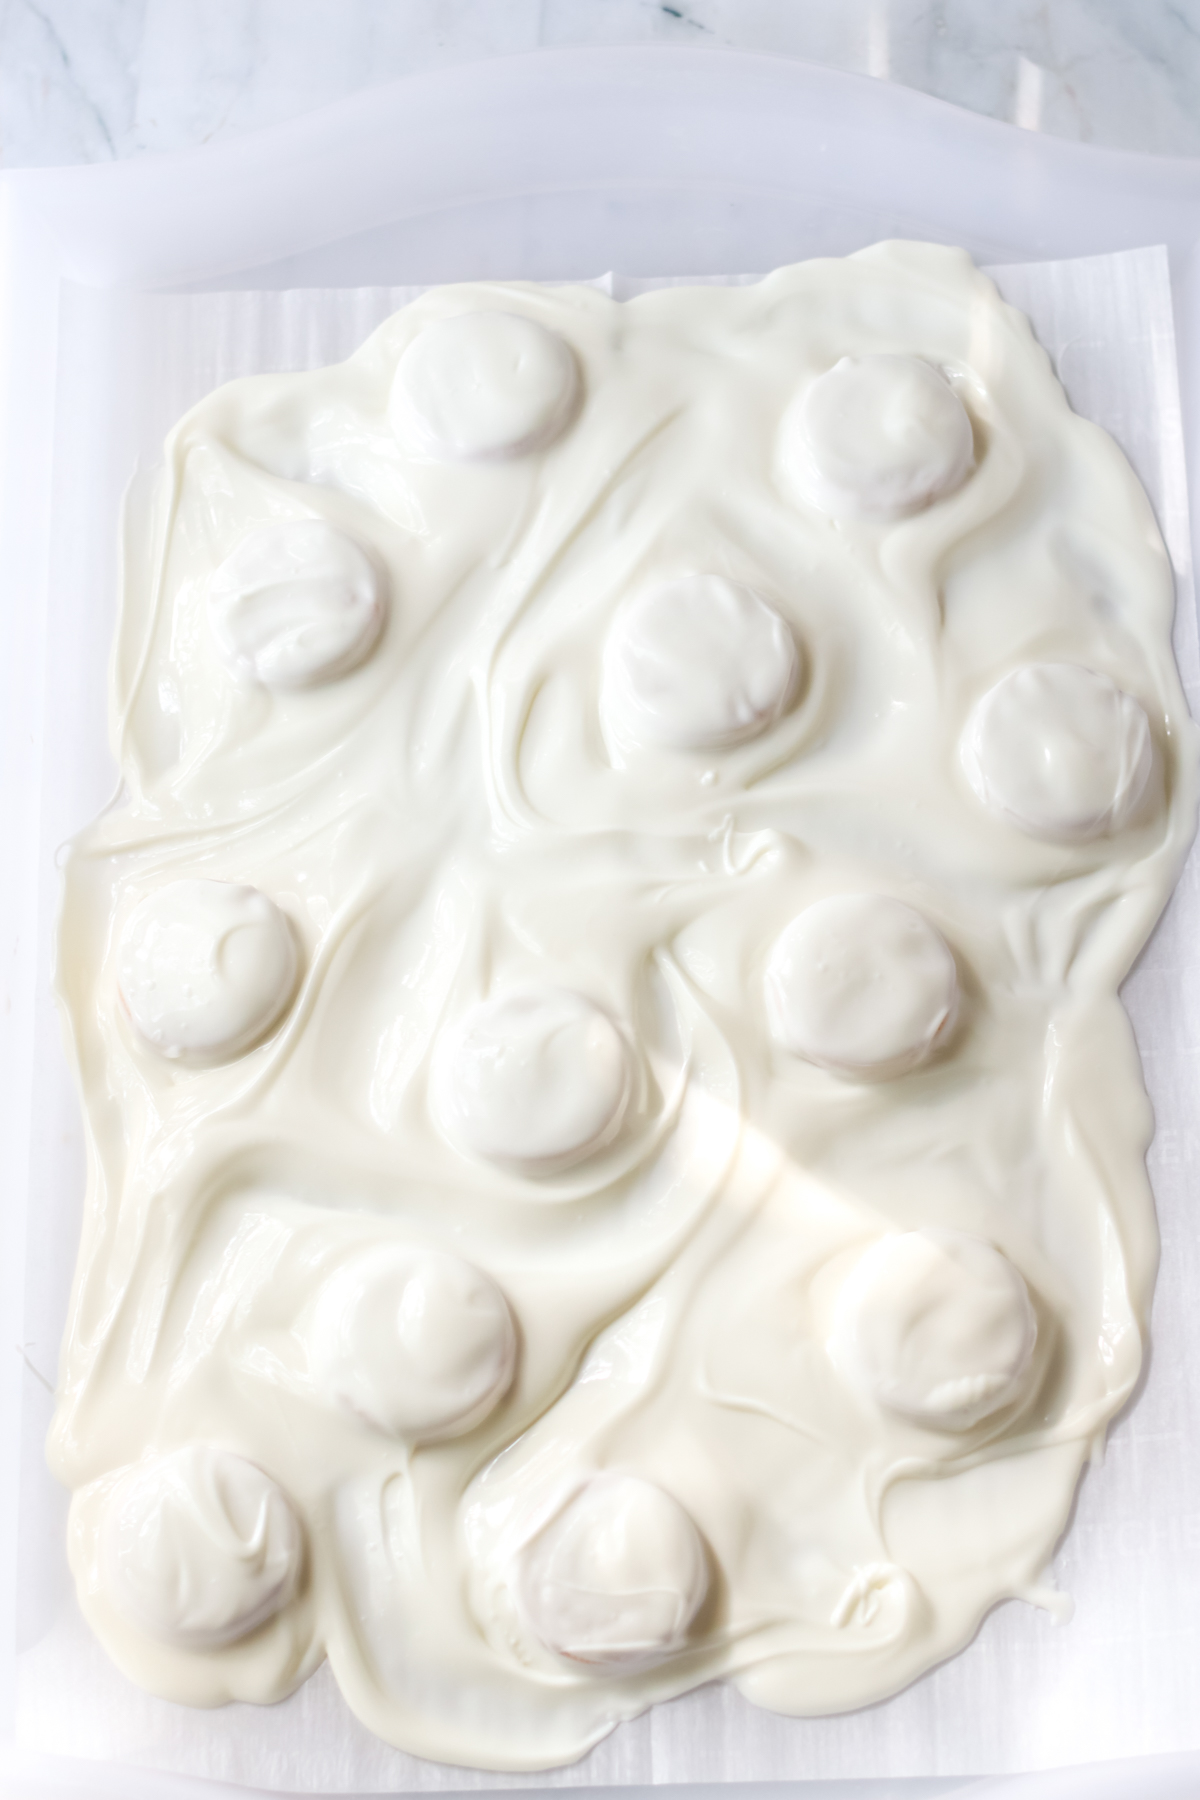 melted white chocolate on a baking sheet